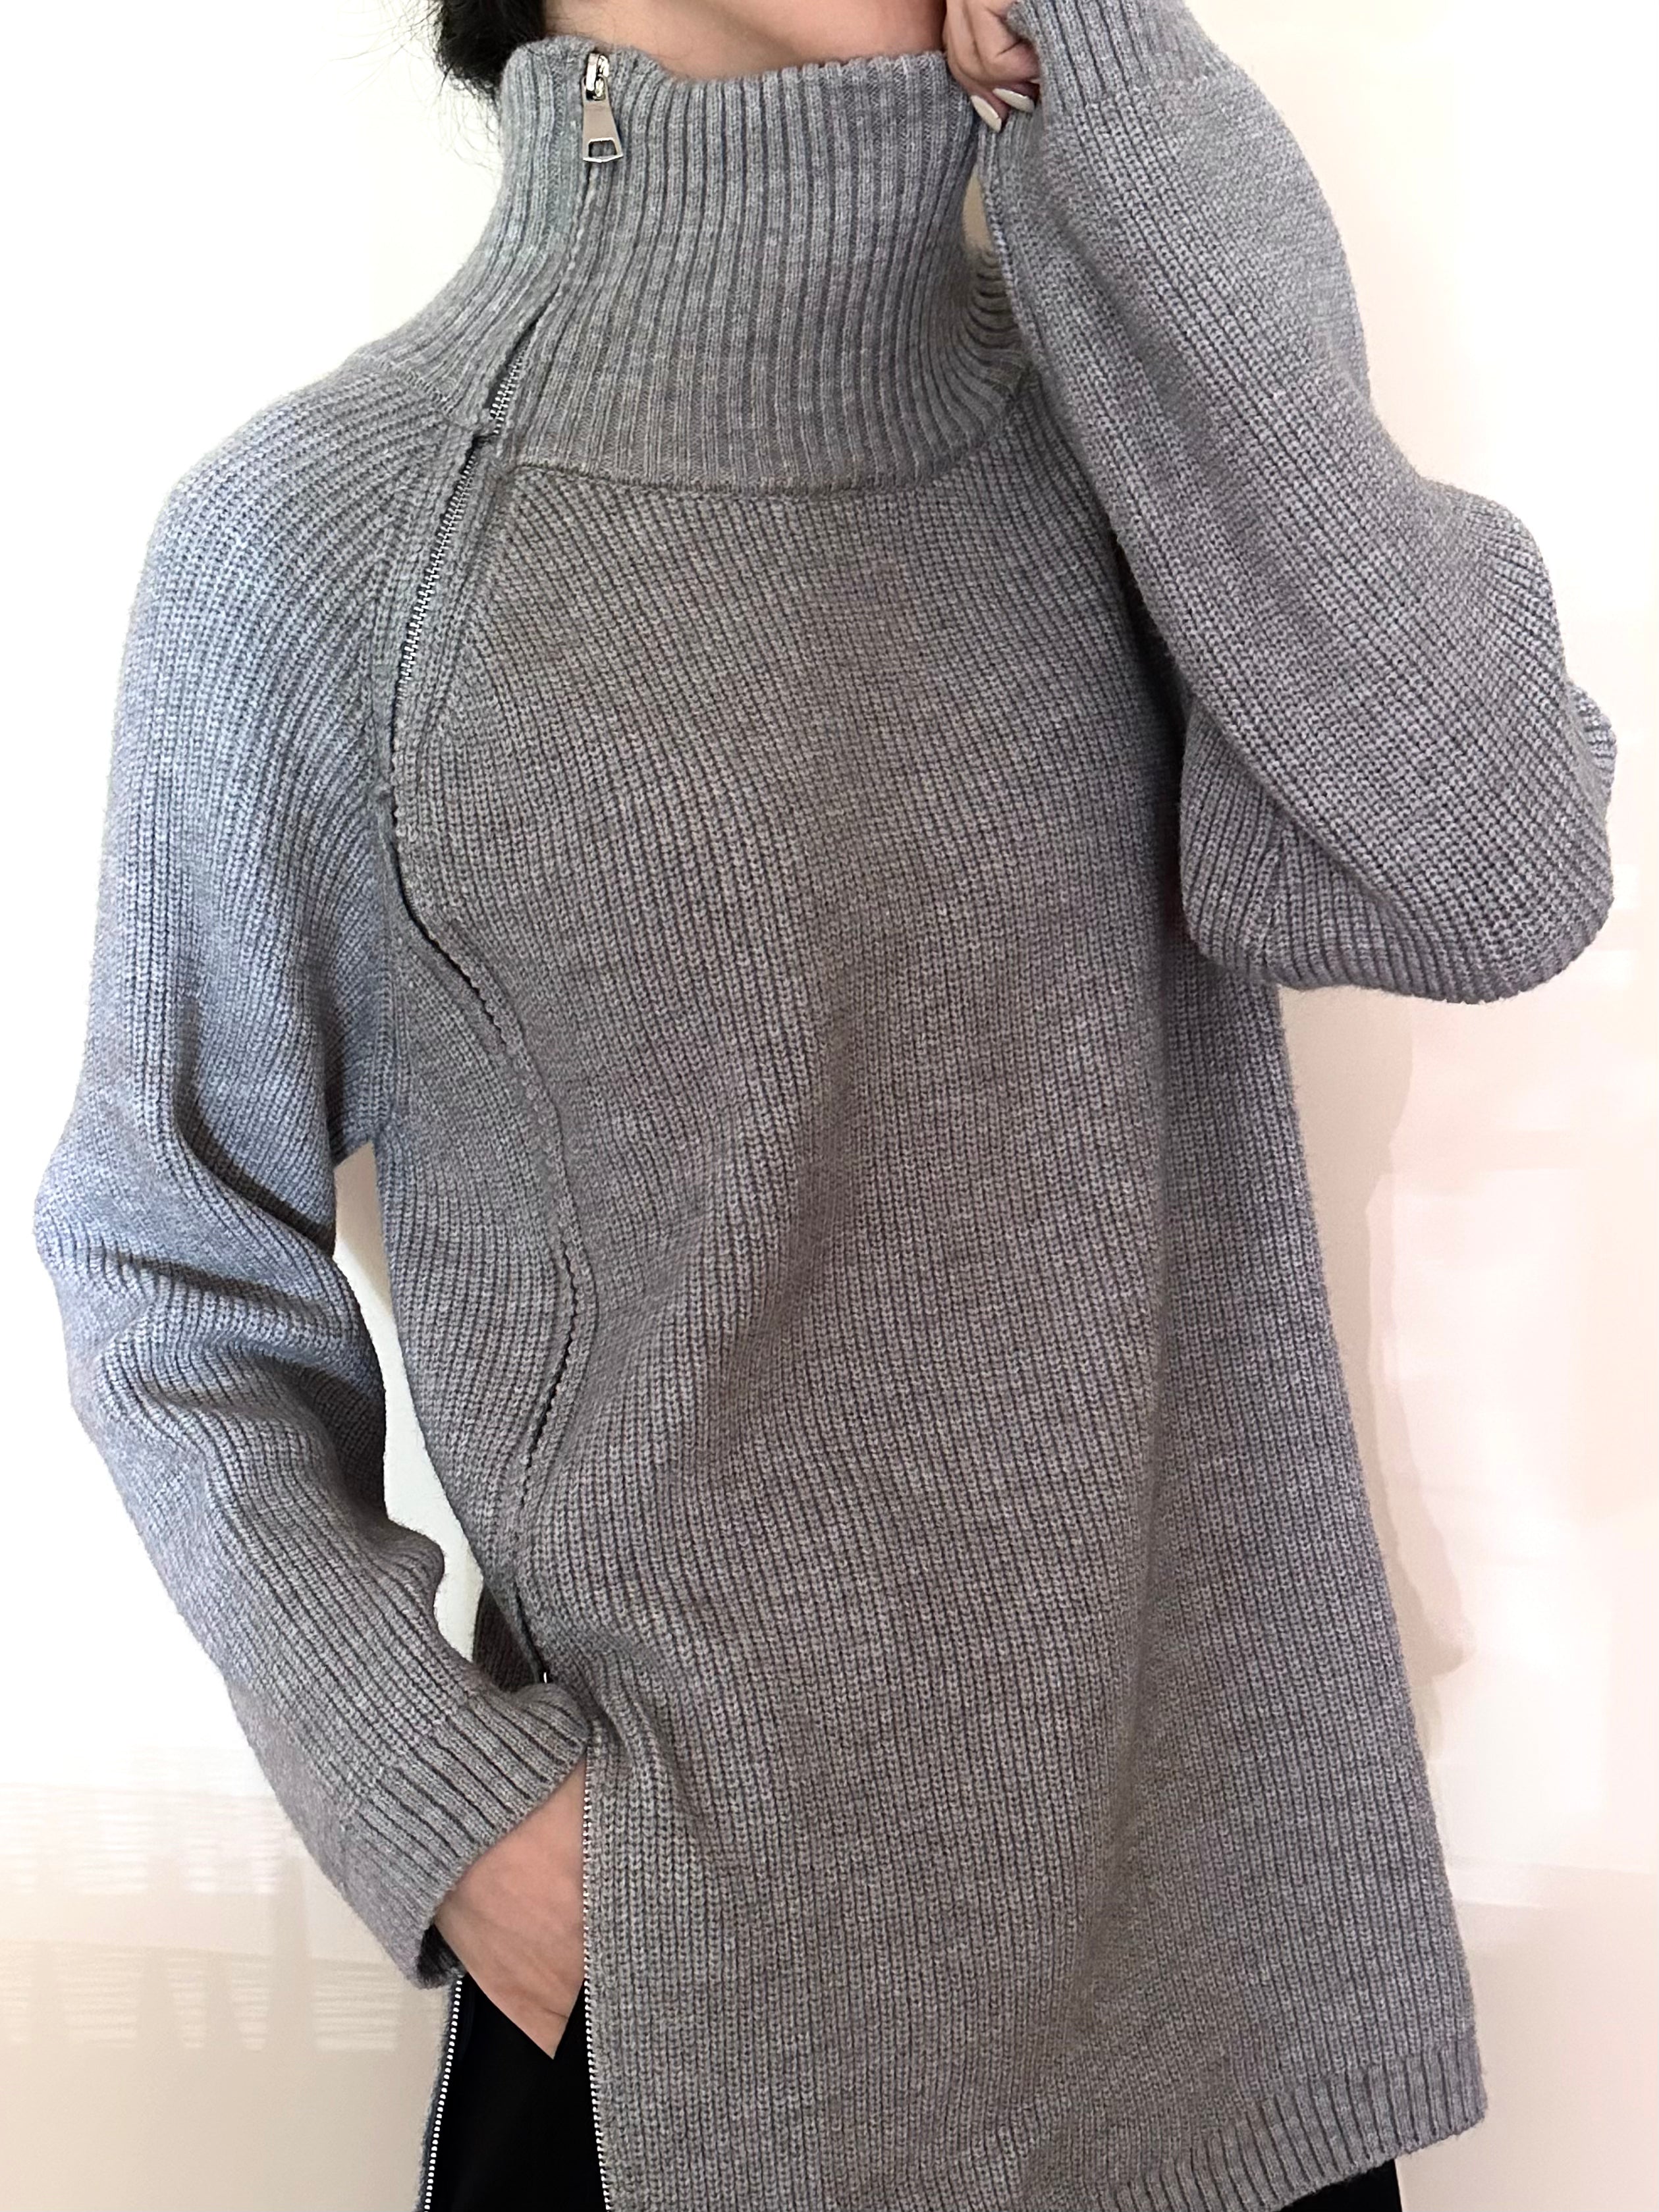 Two Way Zip- Up Sweater